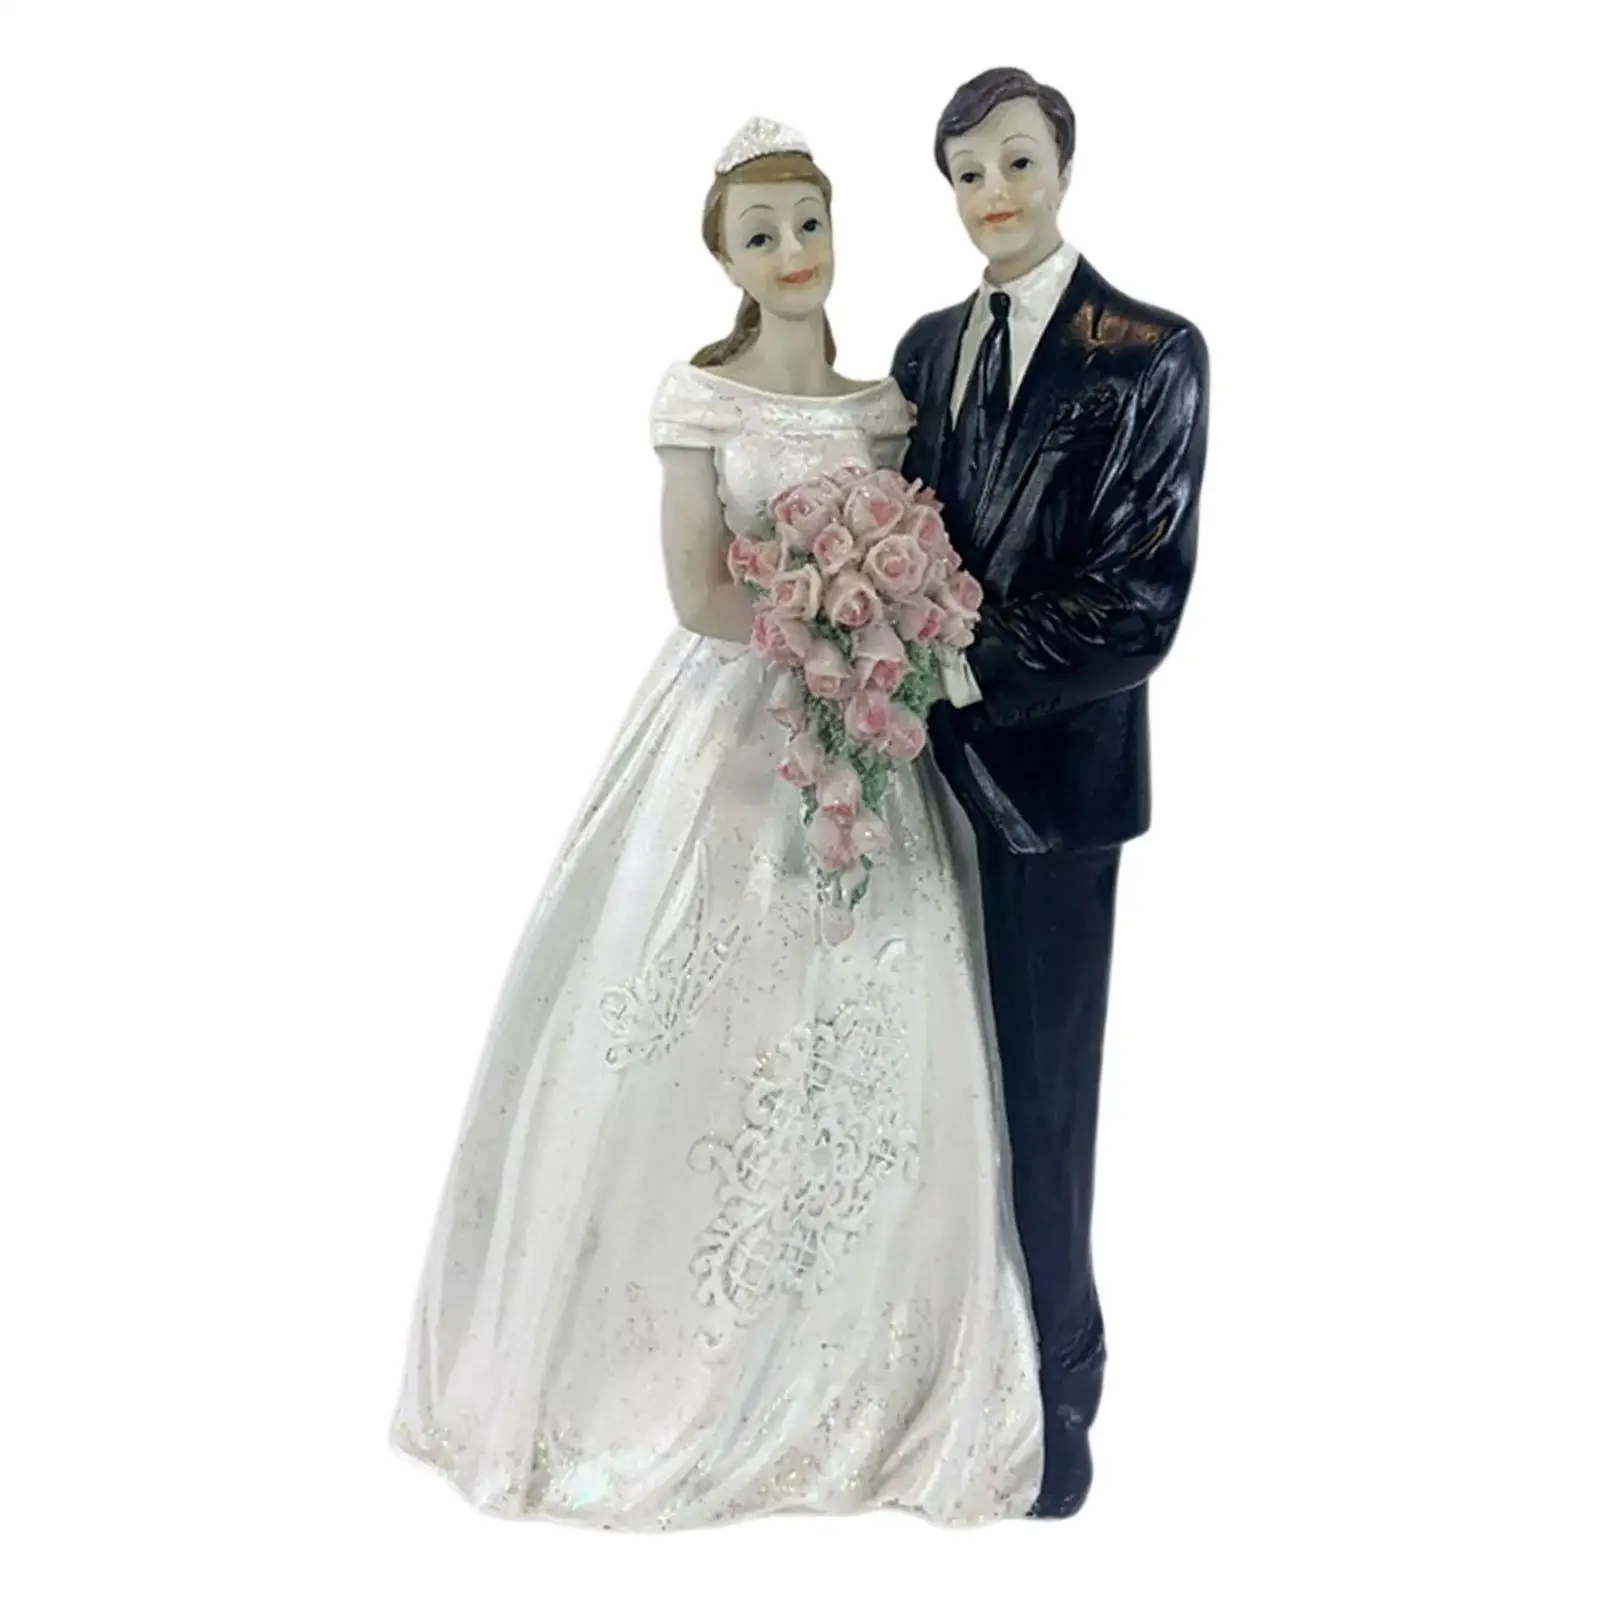 Wedding Decoration Couple Statue Figurines Ornaments For Home Wedding Favors Gift Valentines Day Present Various Styles